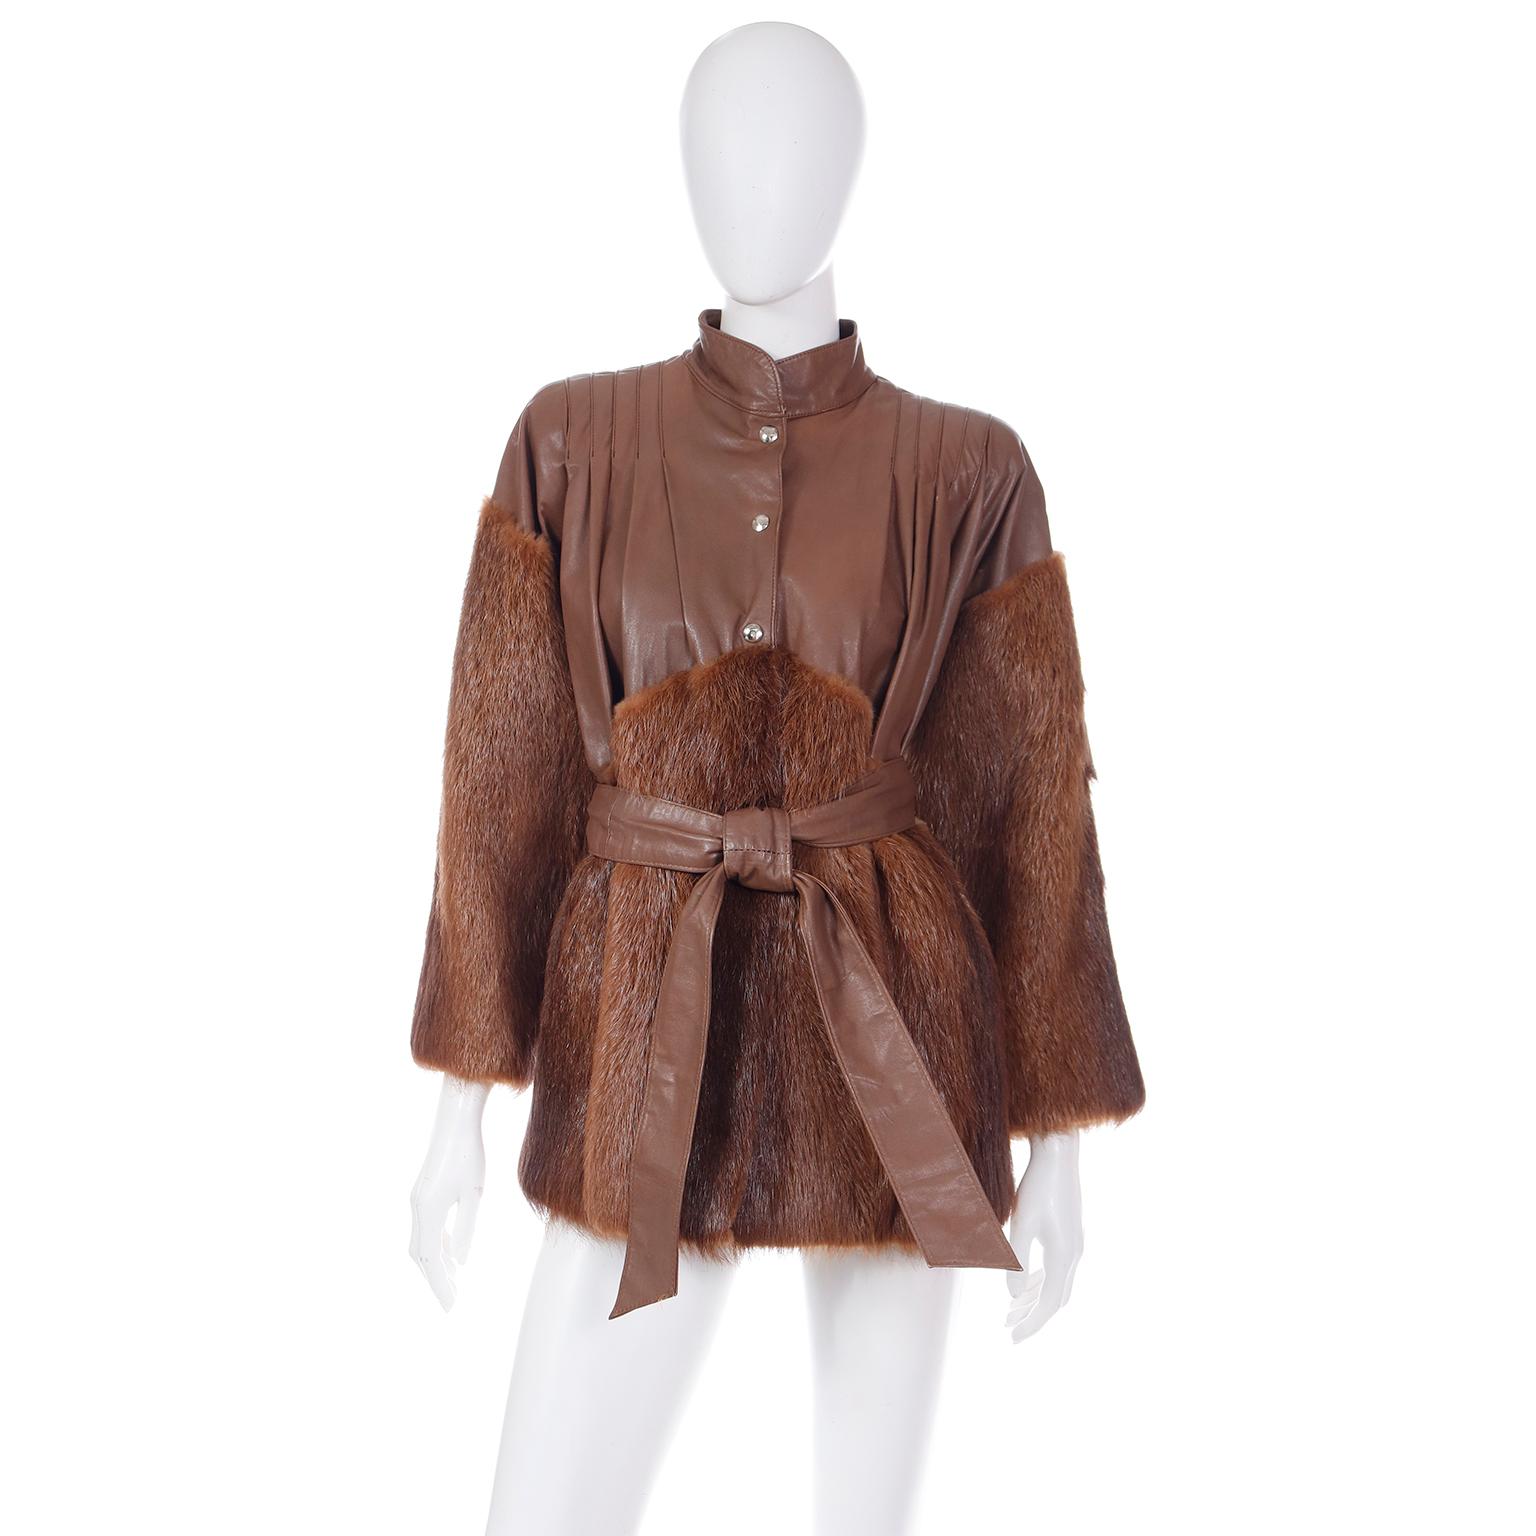 This is a luxe vintage Yves Saint Laurent Fourrures jacket in brown leather with fur trim. The fully lined jacket has its original leather belt and snaps up the front for closure. The fur is on the sleeves from just below the shoulders and it